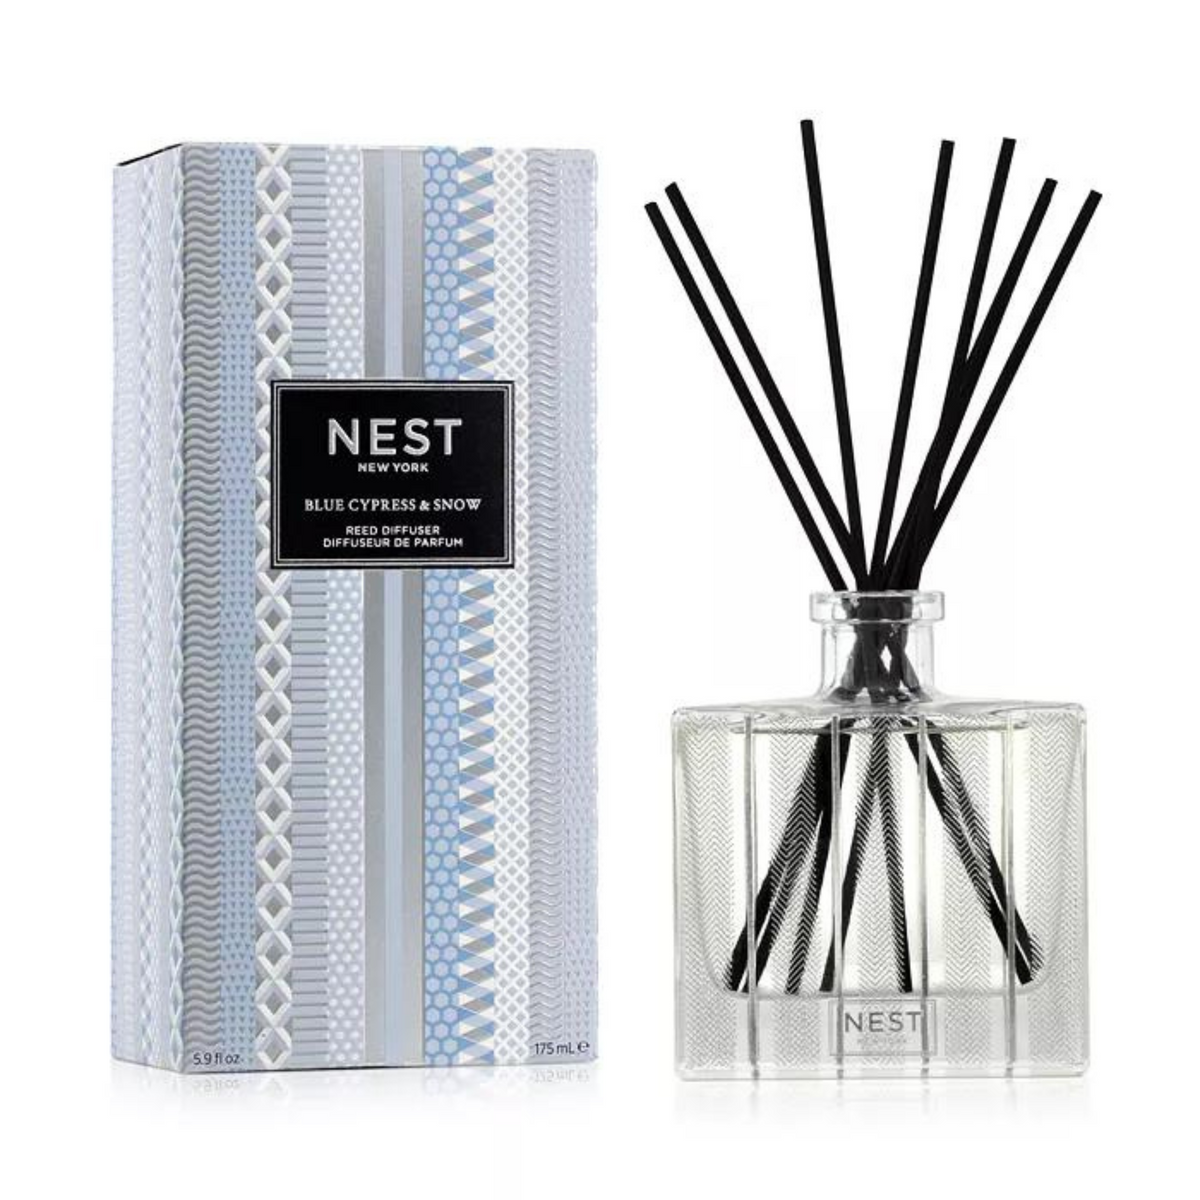 Primary Image of Nest Fragrances Blue Cypress & Snow Reed Diffuser (5.9 oz) 